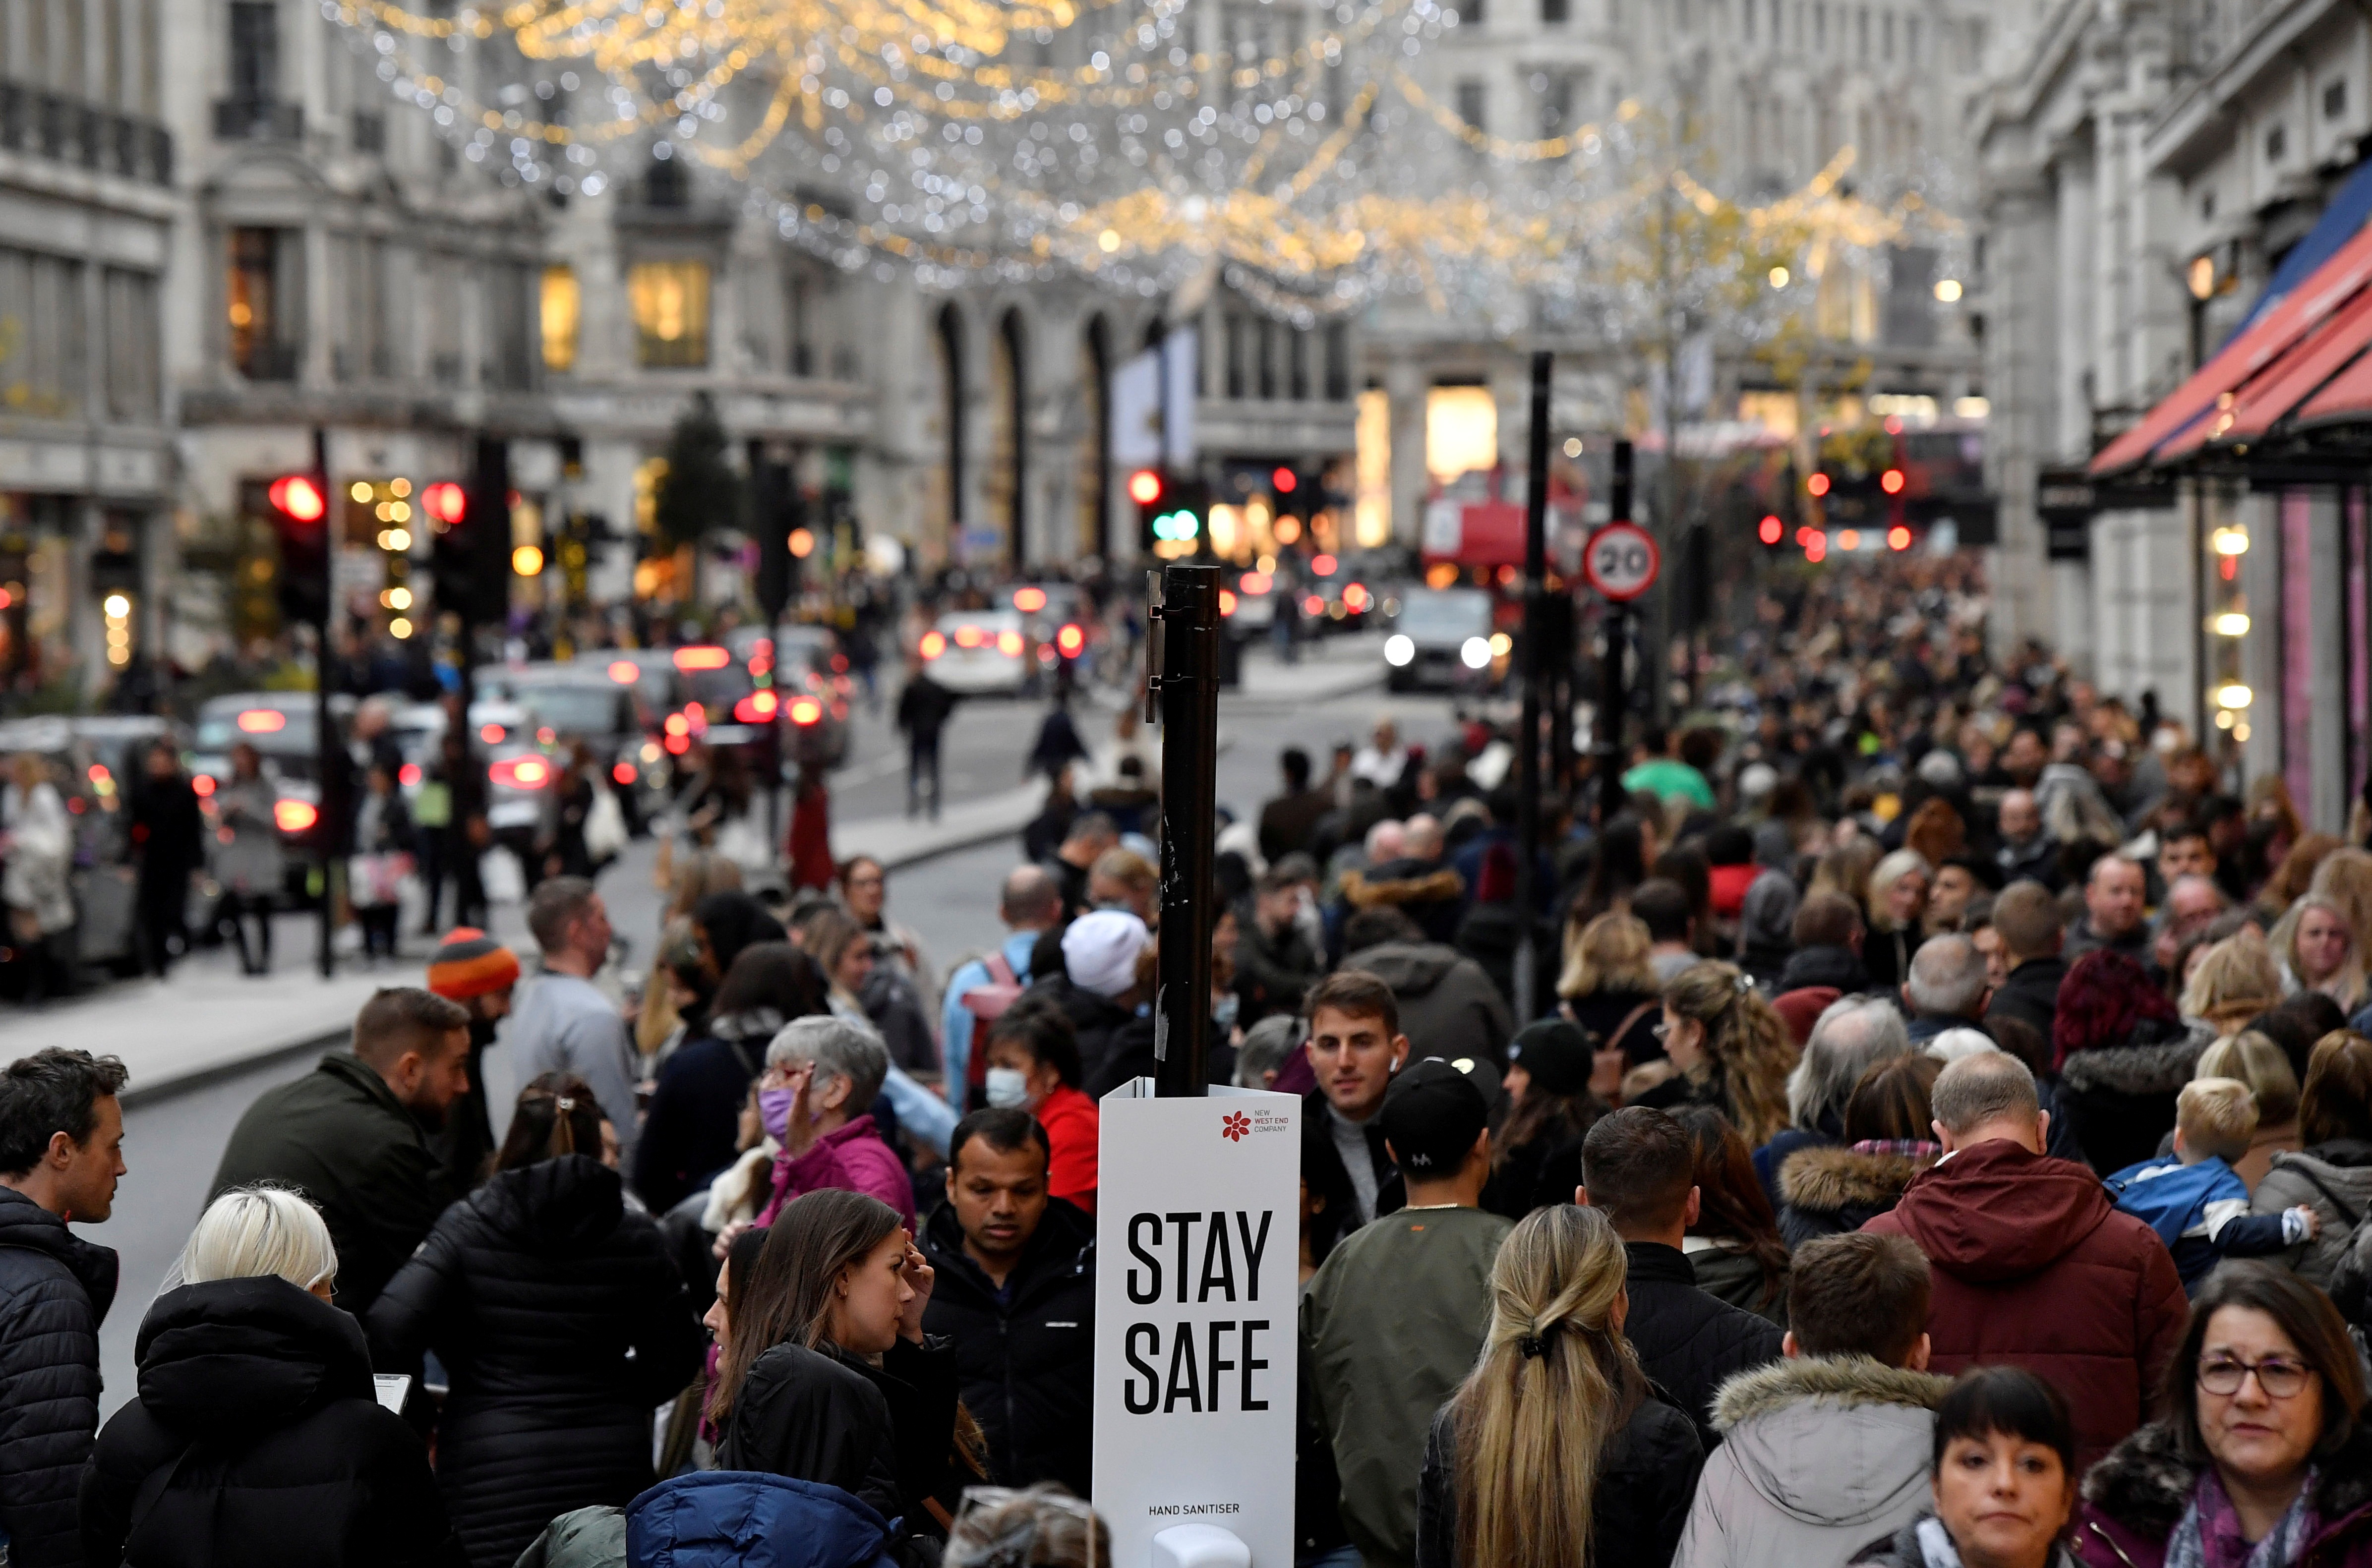 Shoppers walk past a message on a hand sanitiser station amid the spread of the coronavirus disease (COVID-19) pandemic, in Regent Street, London, Britain, November 20, 2021. REUTERS/Toby Melville